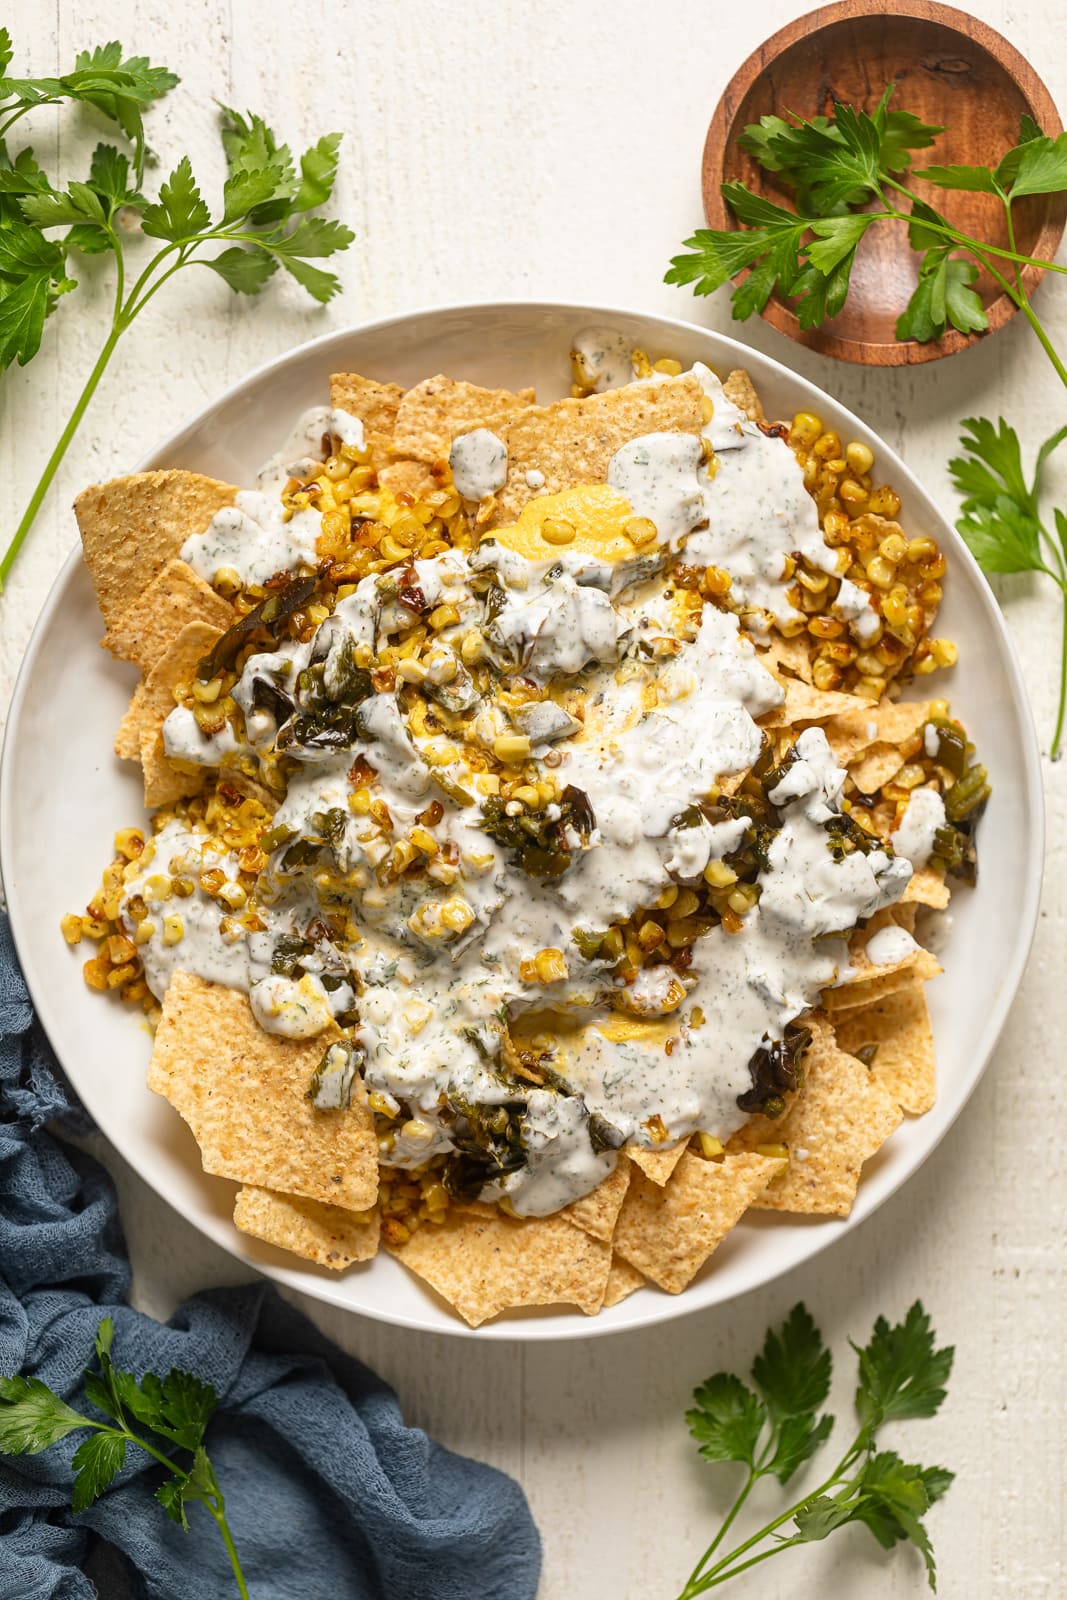 Plate of Dairy-Free Mexican Street Corn Nachos